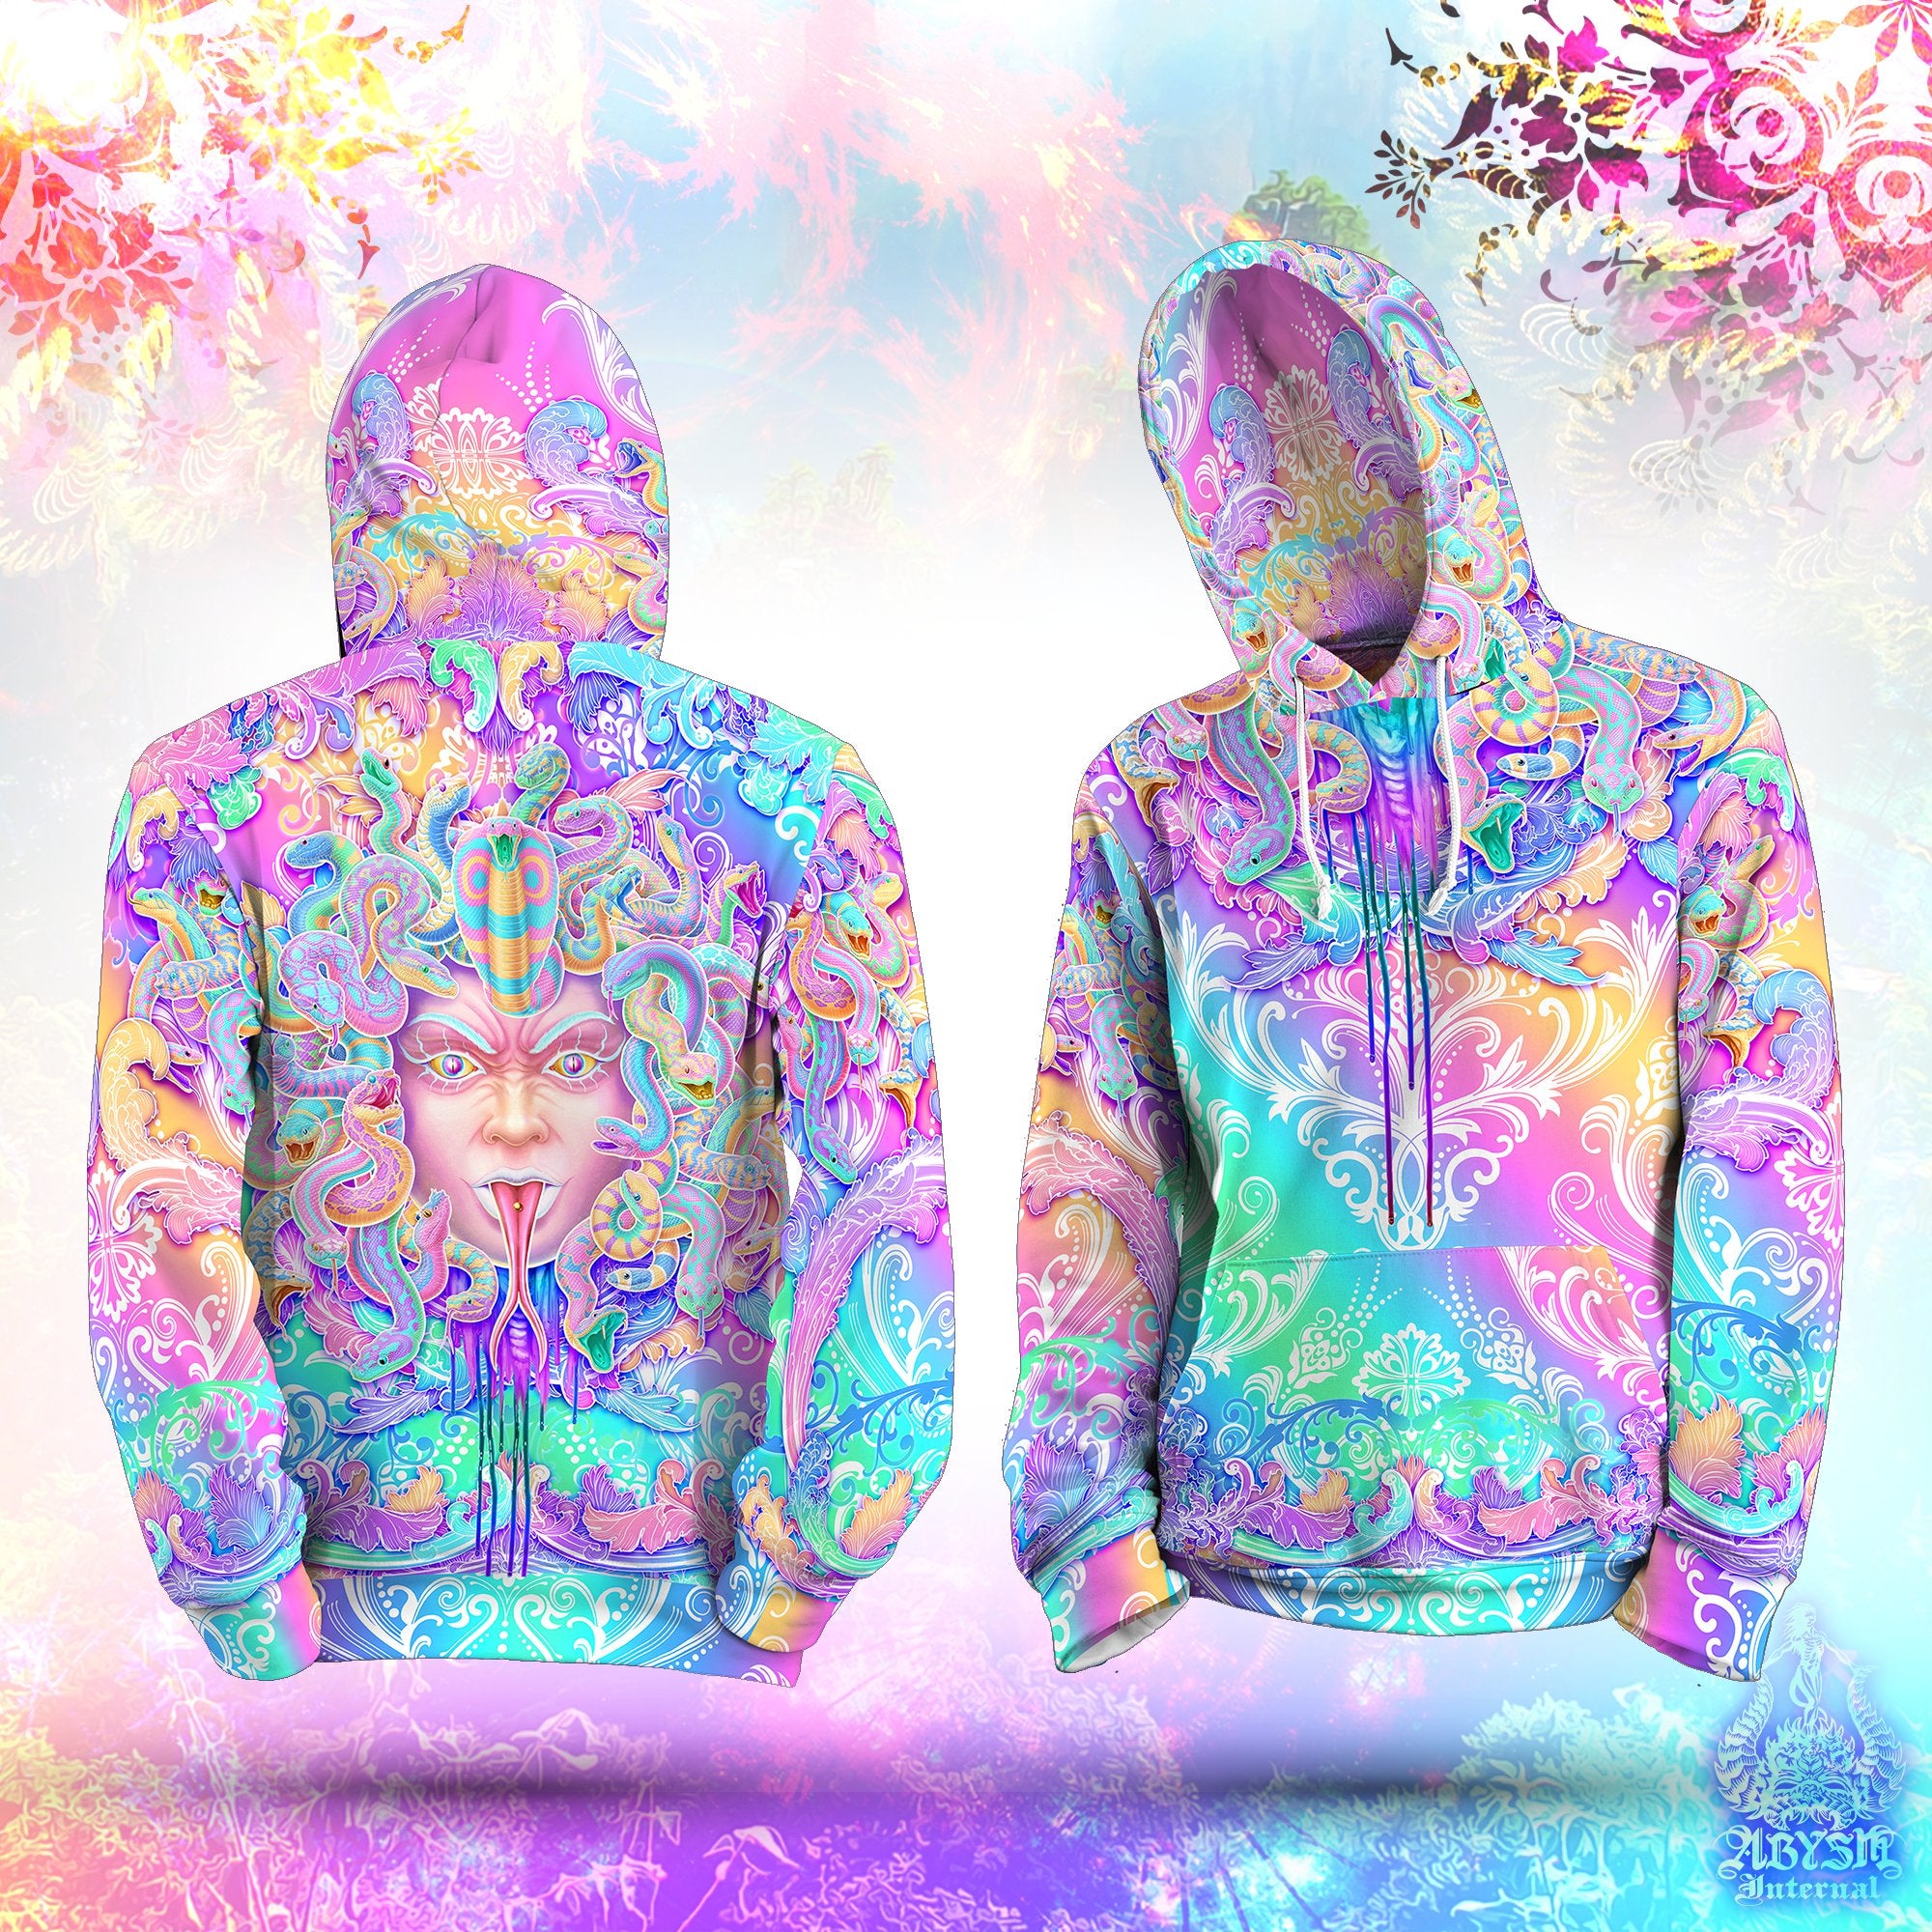 Festival Hoodie, Aesthetic Pullover, Colorful, Streetwear, Pastel Outfit, Psychedelic Sweater, Trippy Clothing, Unisex - Medusa Skull, 2 Faces - Abysm Internal